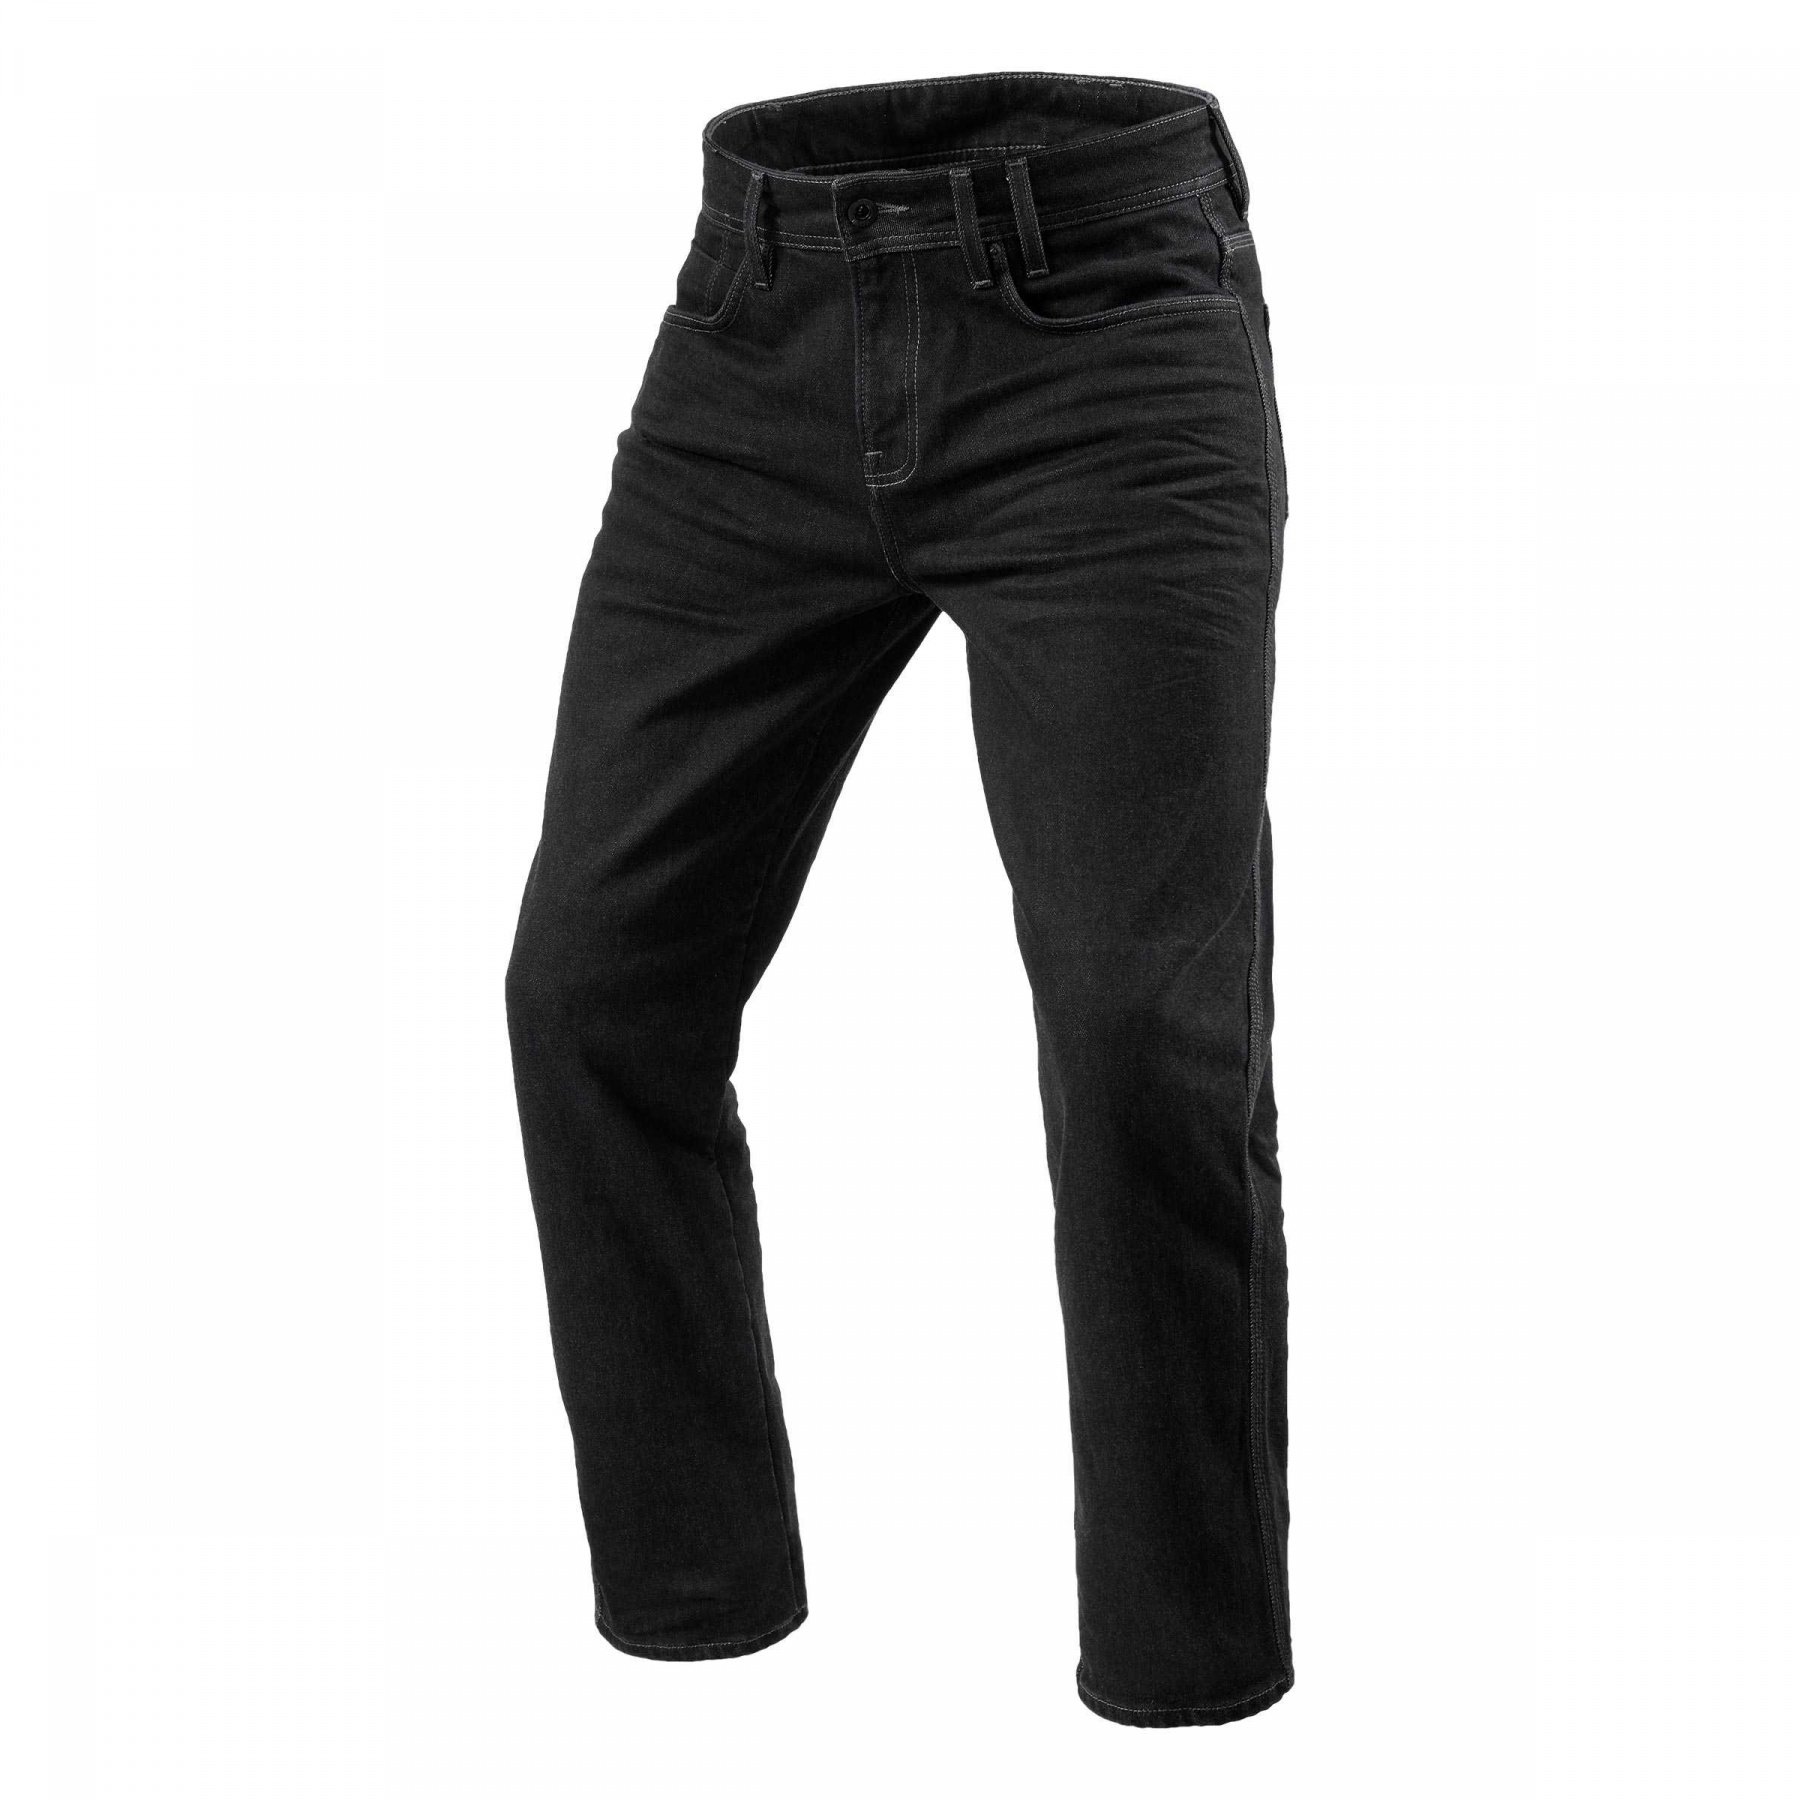 Image of REV'IT! Jeans Lombard 3 RF Dark Blue Used Motorcycle Jeans Size L32/W28 ID 8700001338301